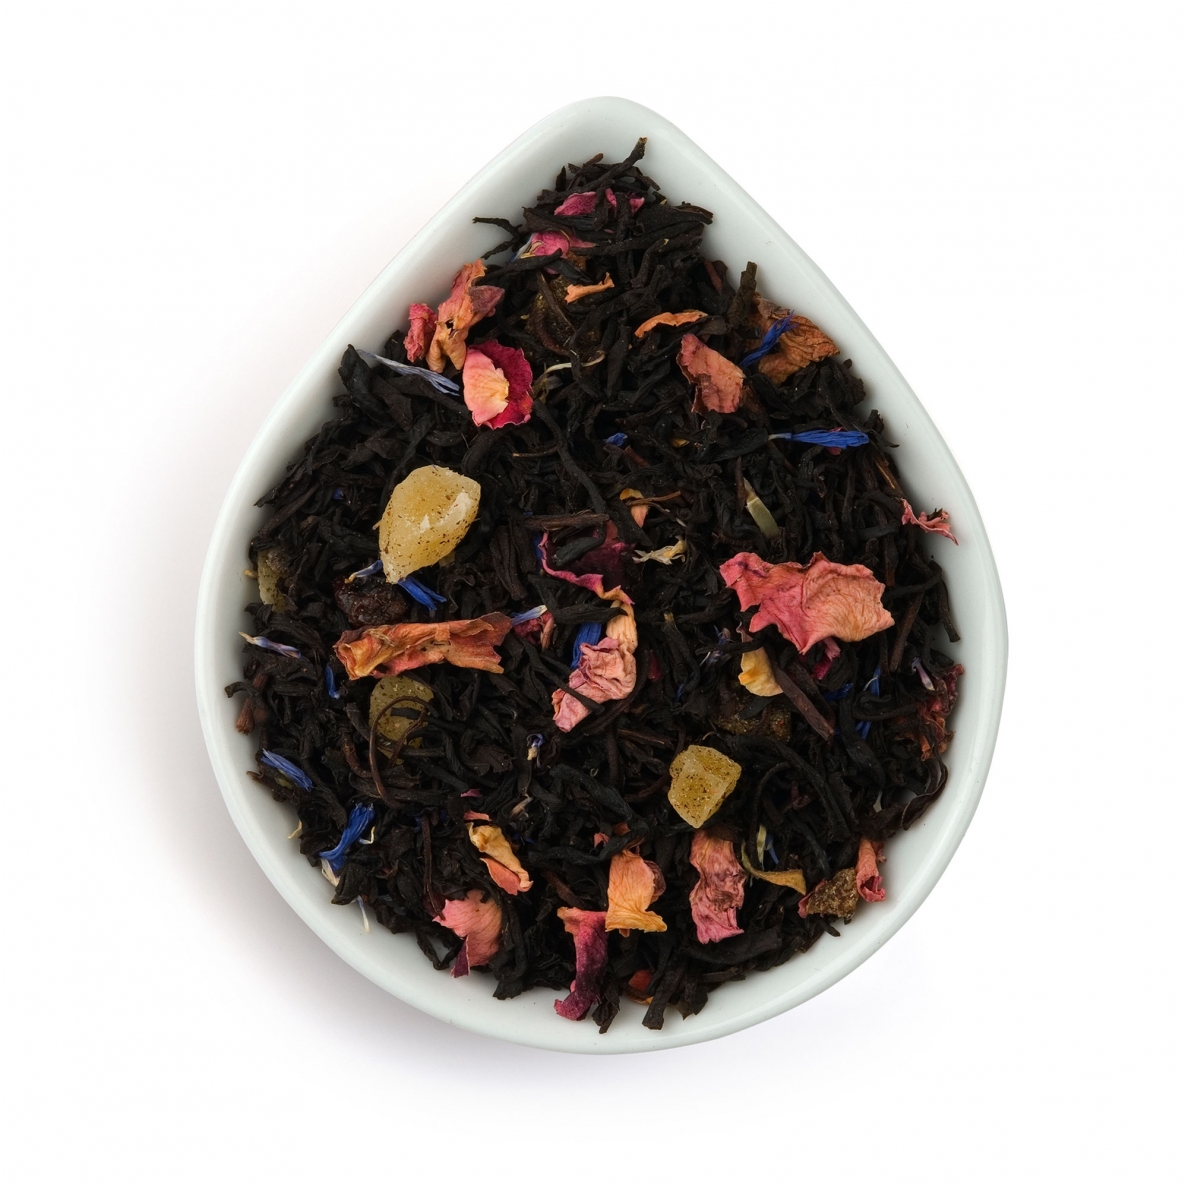 FLAVOURED BLACK TEA 'PALACE OF ROSES'